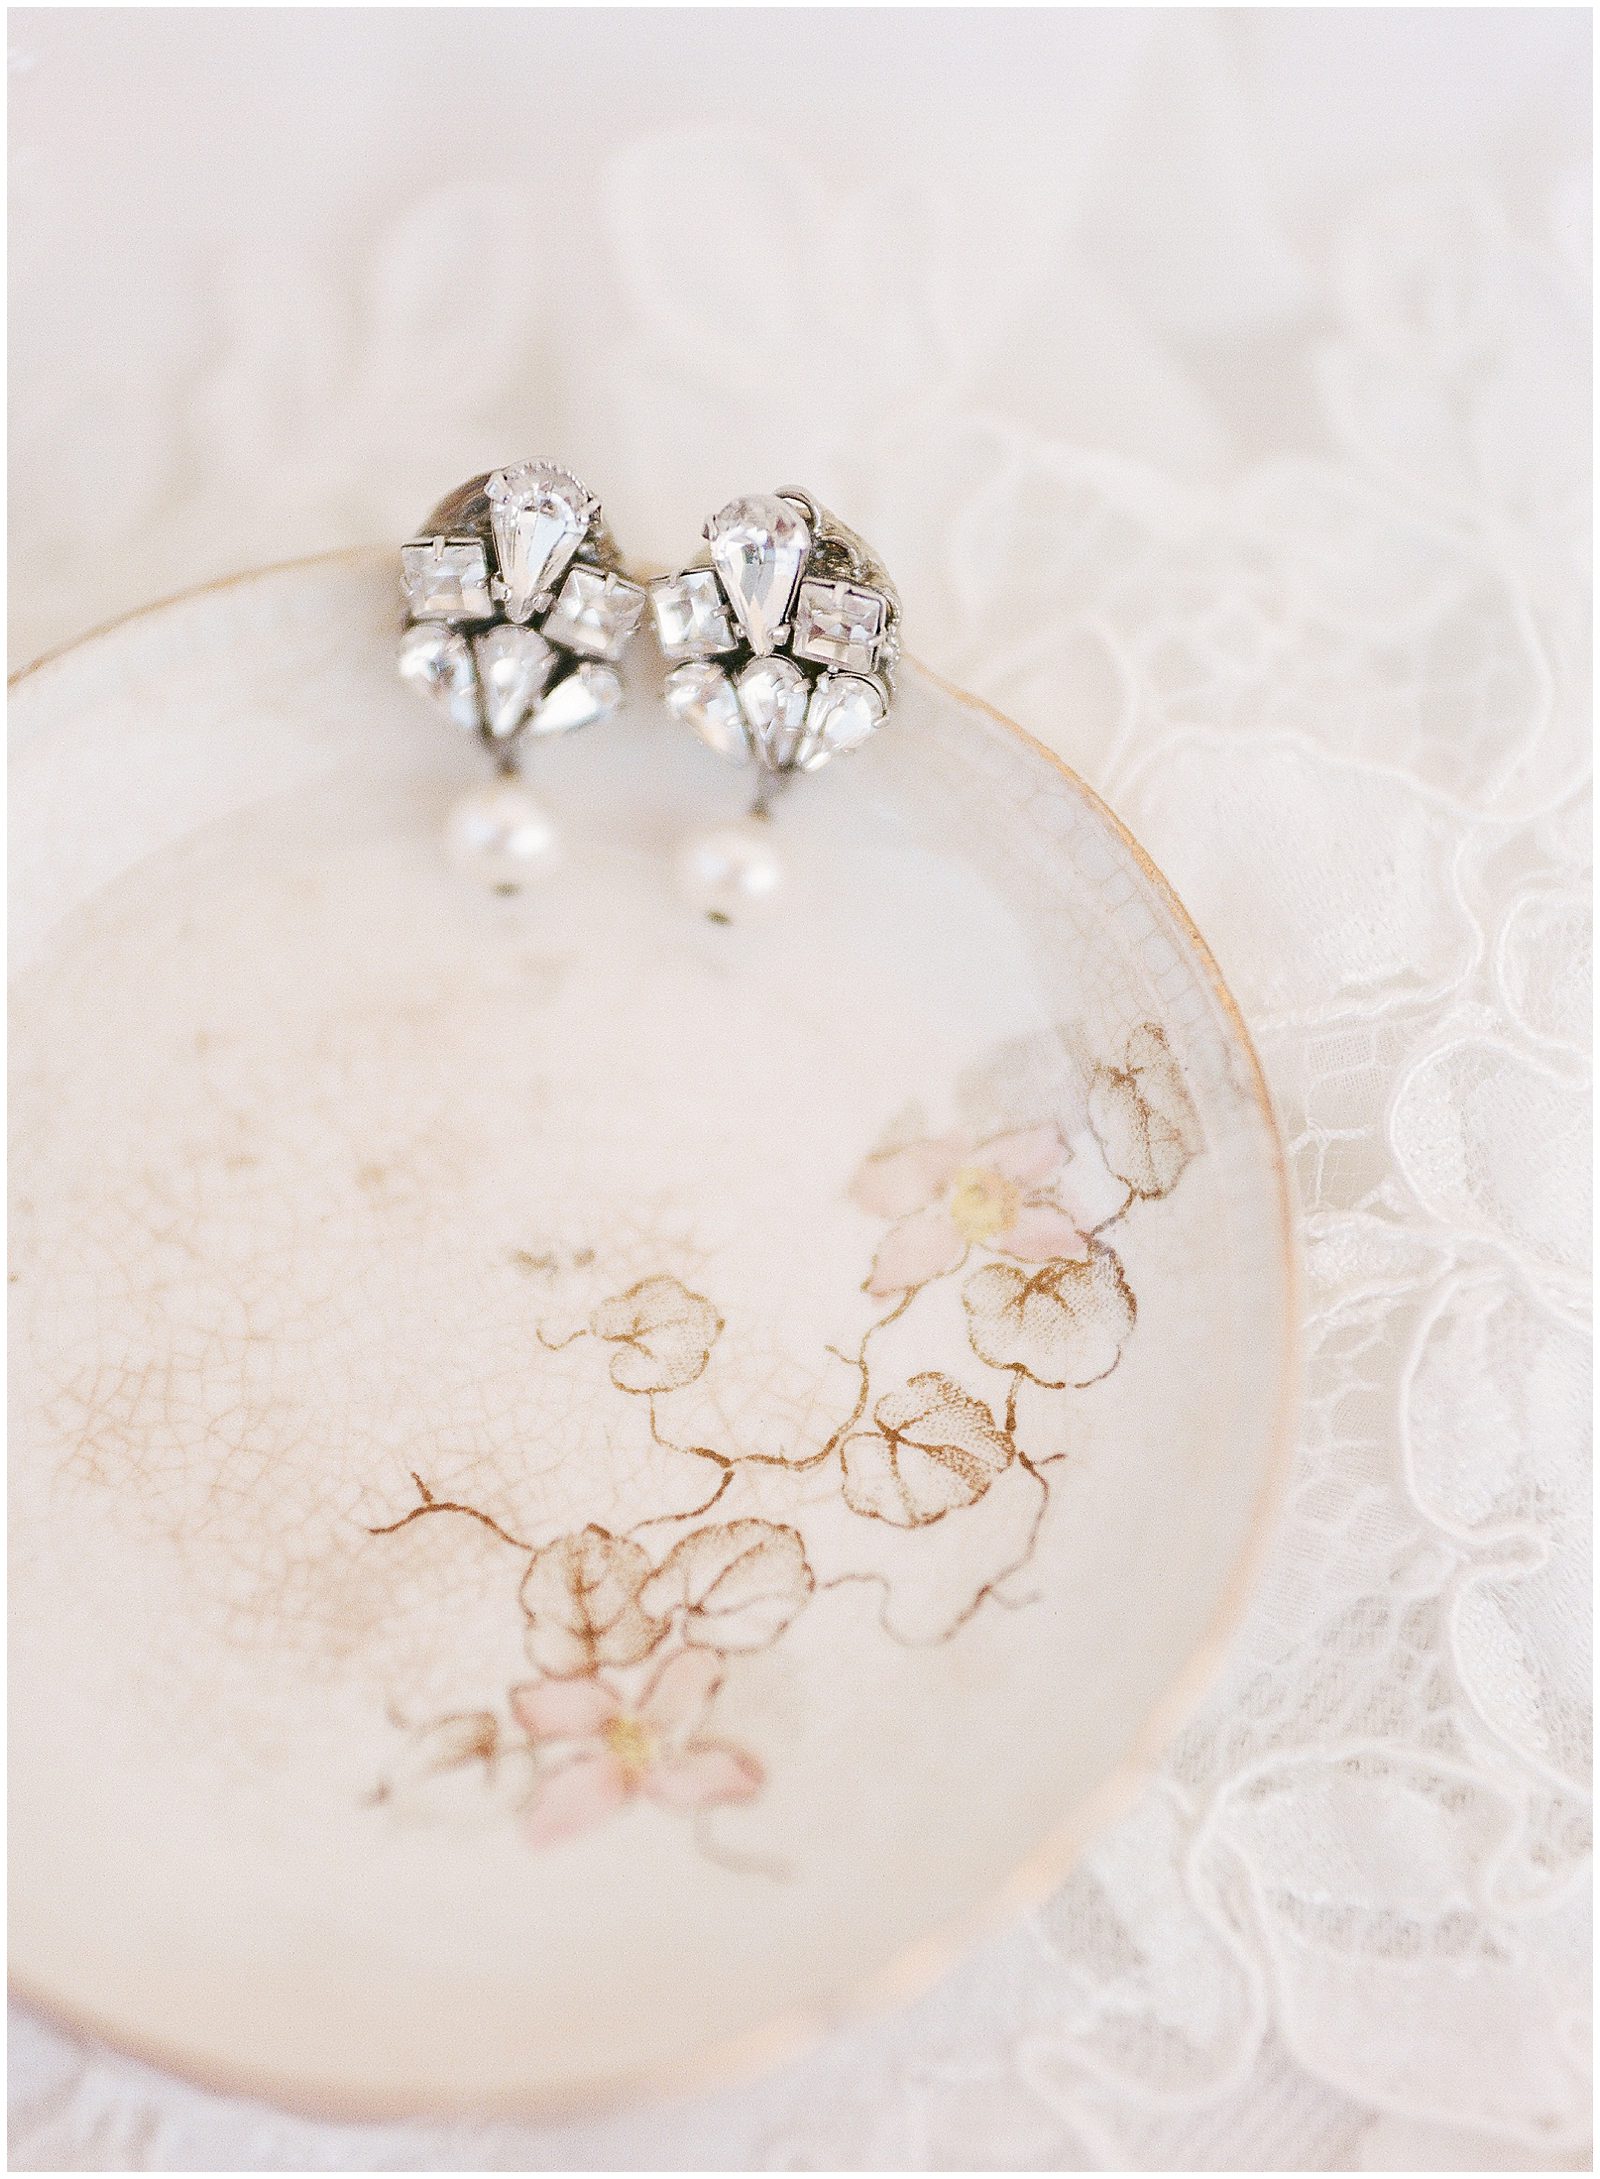 Tennessee Wedding Photographer Captures Brides Earrings on Dish Photo